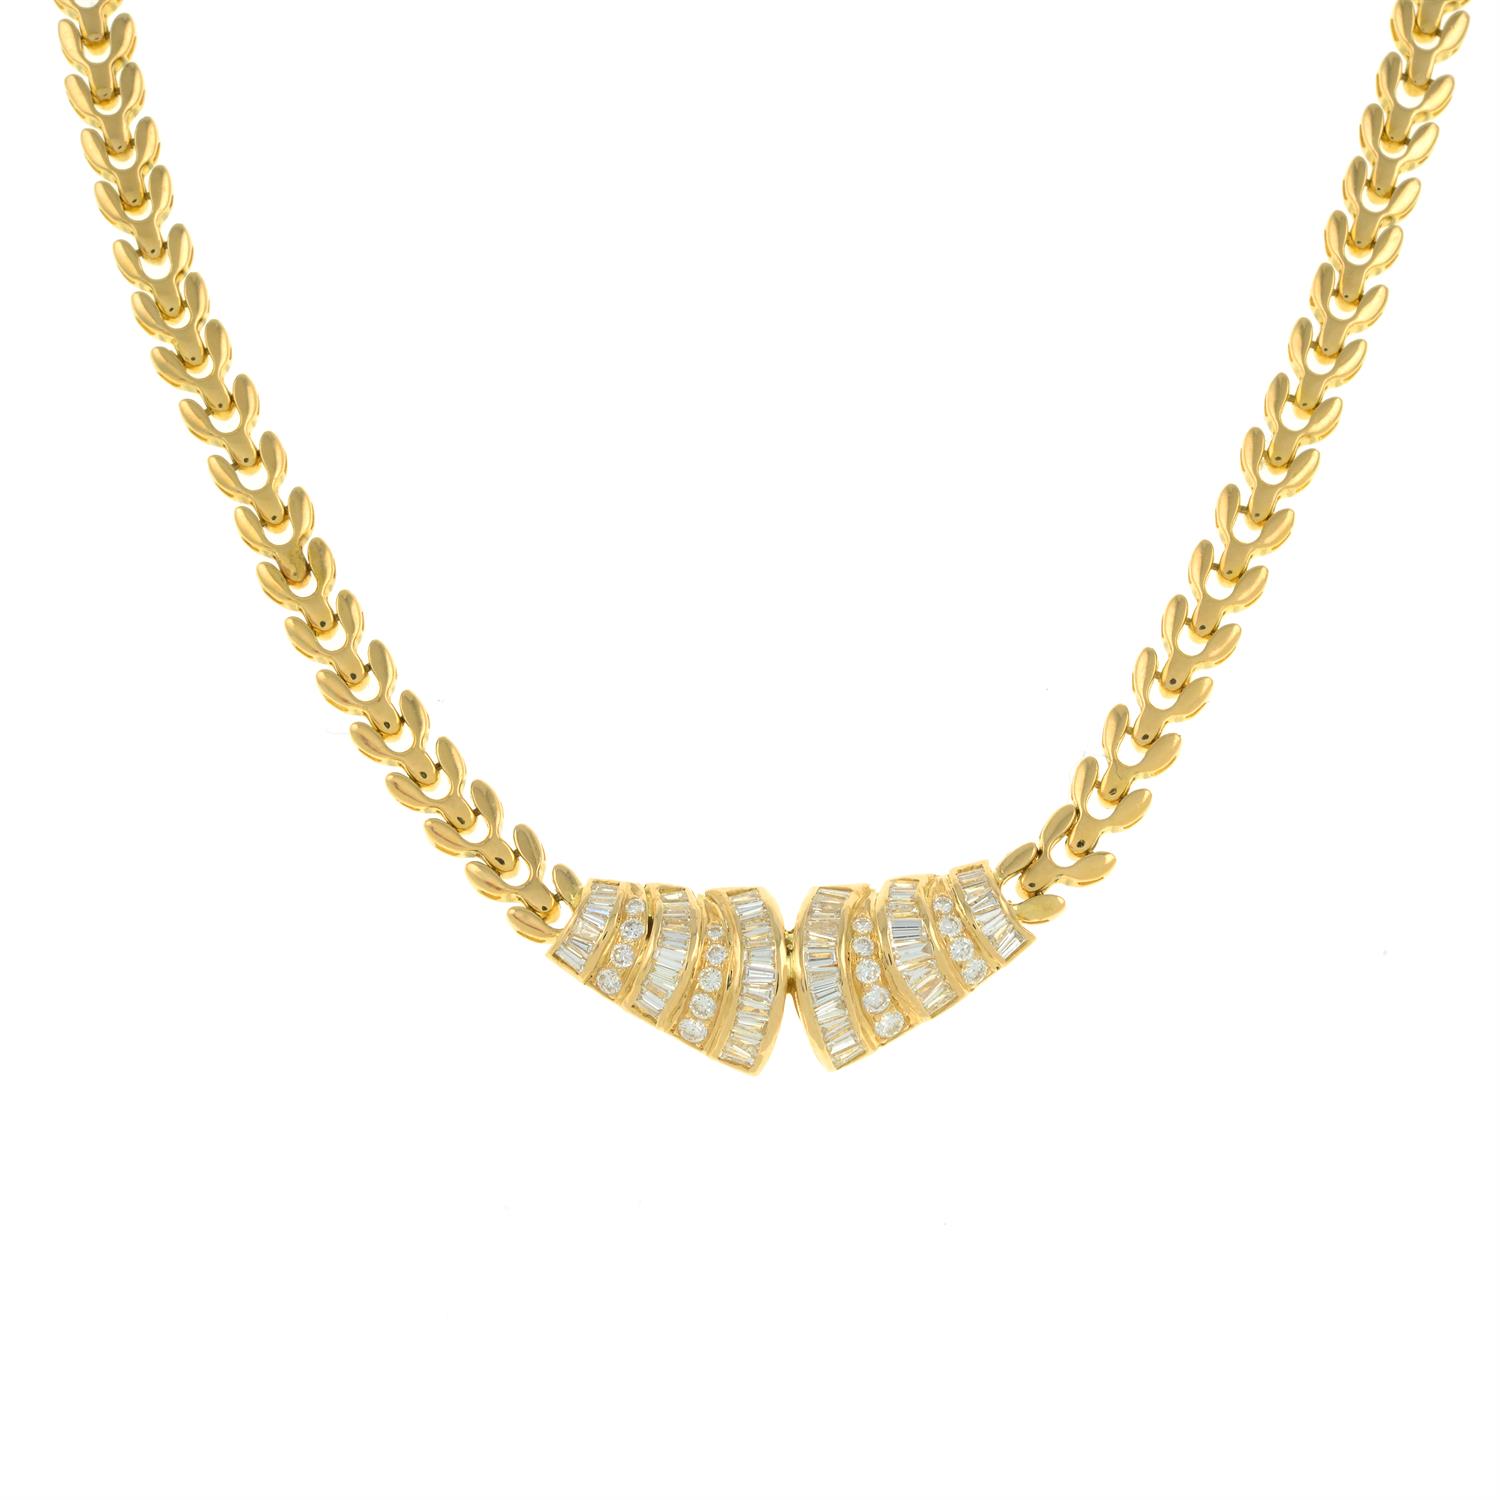 18ct gold diamond necklace - Image 2 of 3